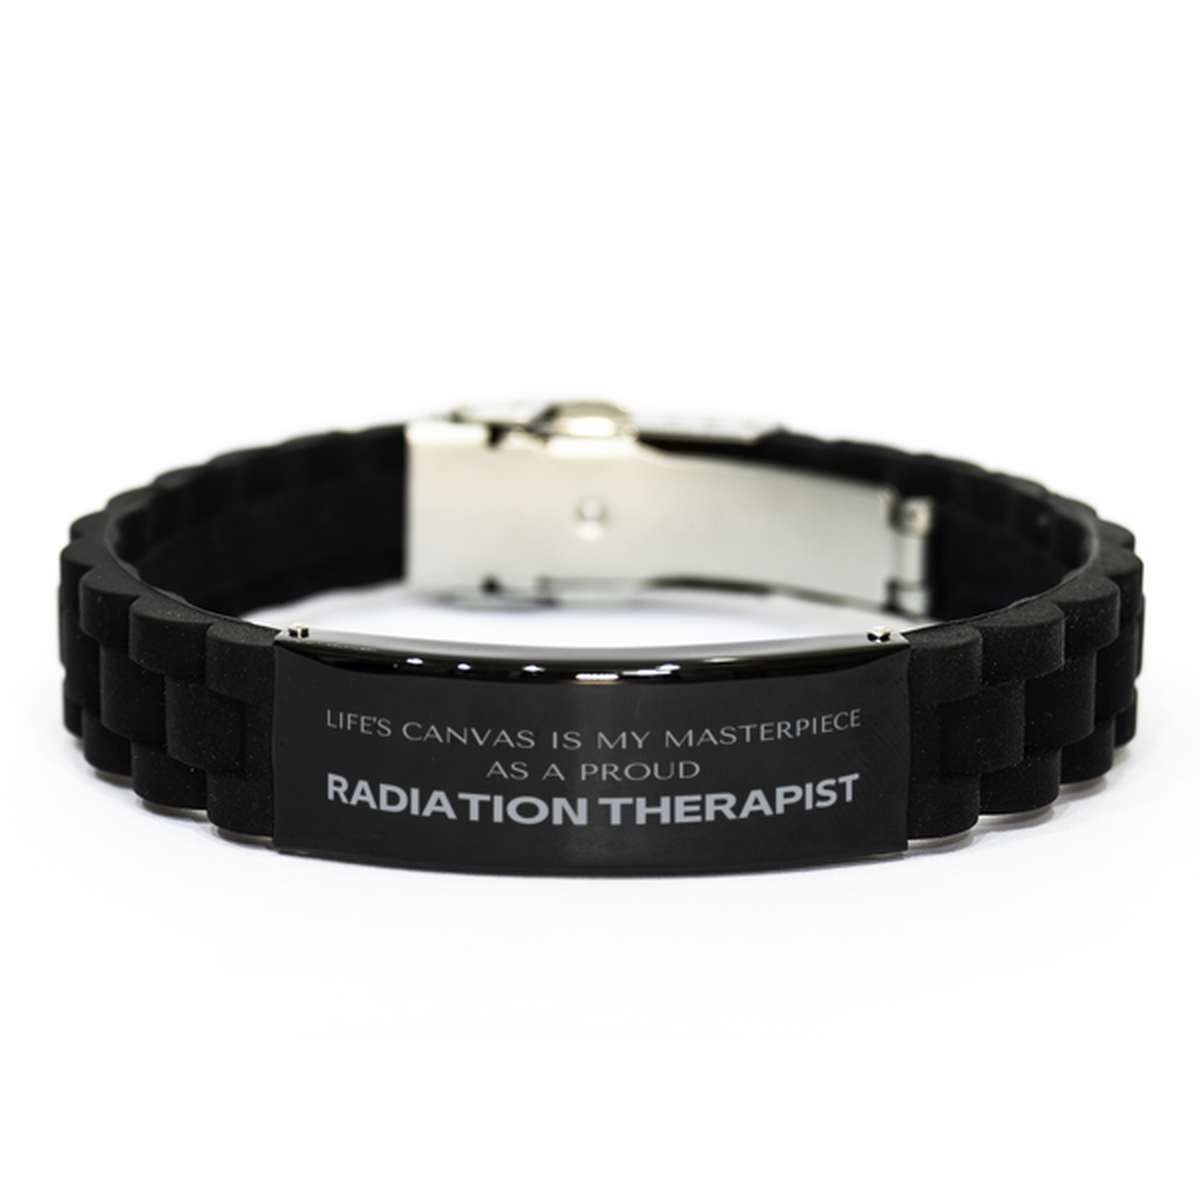 Proud Radiation Therapist Gifts, Life's canvas is my masterpiece, Epic Birthday Christmas Unique Black Glidelock Clasp Bracelet For Radiation Therapist, Coworkers, Men, Women, Friends